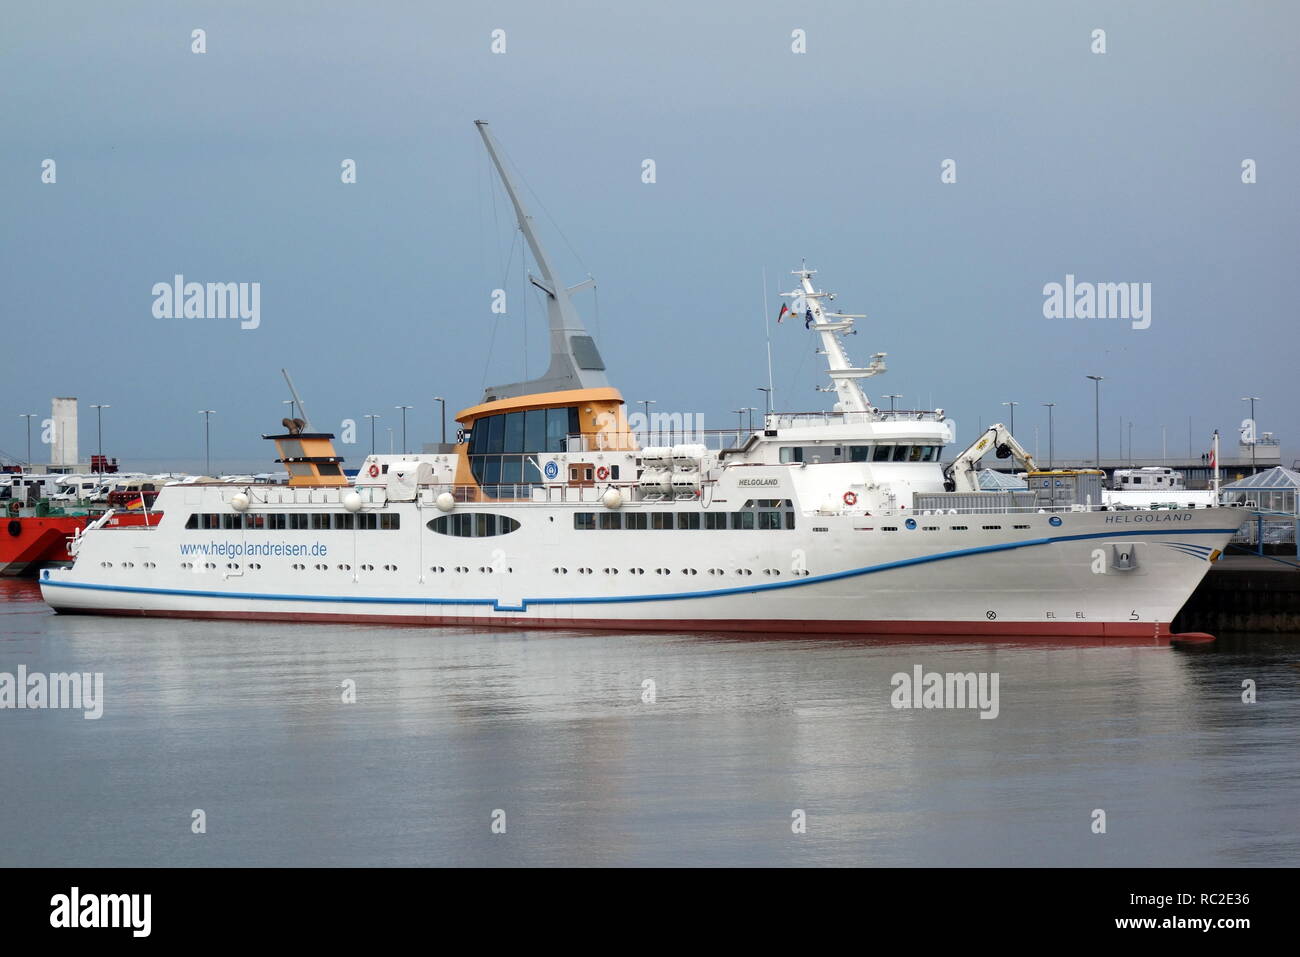 The passenger ship Helgoland is on 27 March 2018 in the port of Cuxhaven. Stock Photo